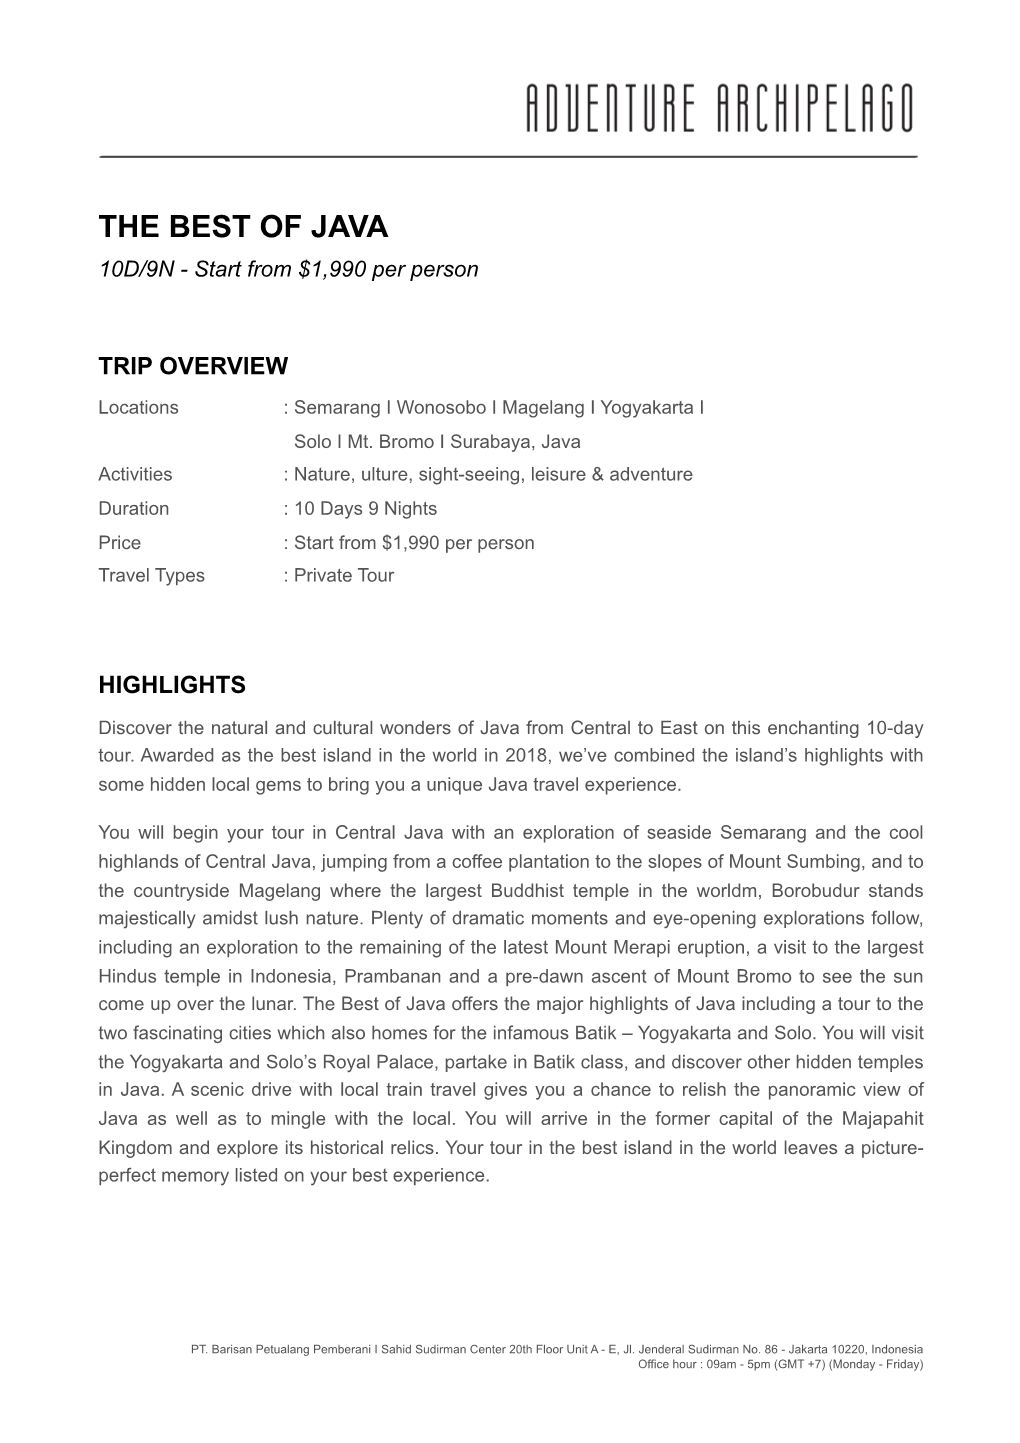 THE BEST of JAVA 10D/9N - Start from $1,990 Per Person